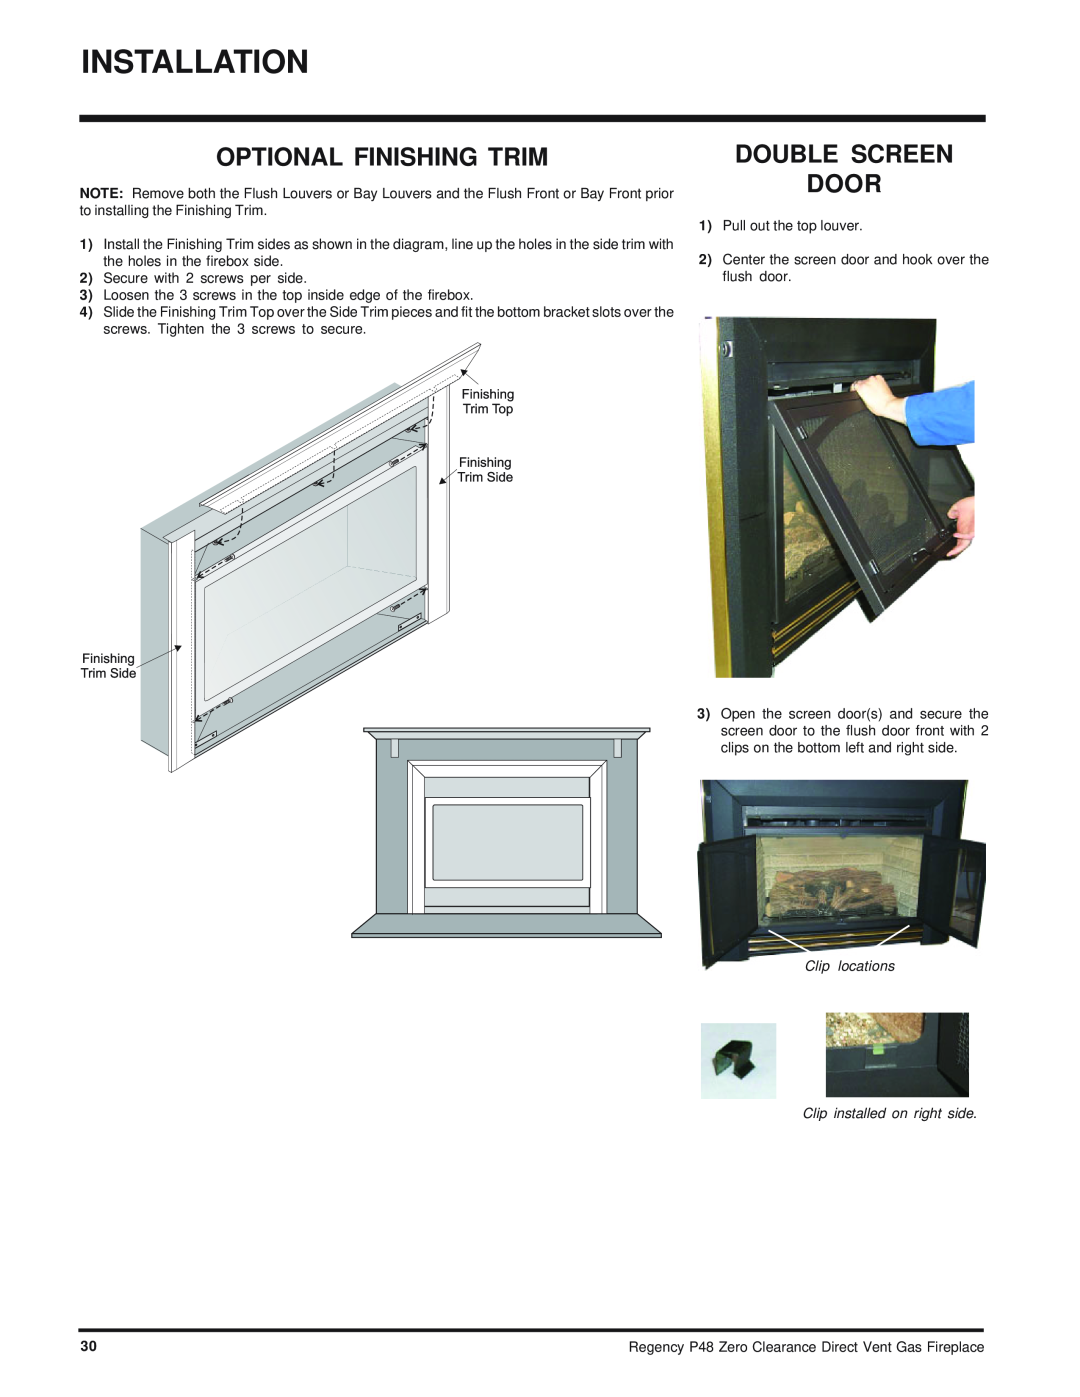 Regency P48-NG, P48-LP Optional Finishing Trim, Double Screen Door, Clip locations Clip installed on right side 